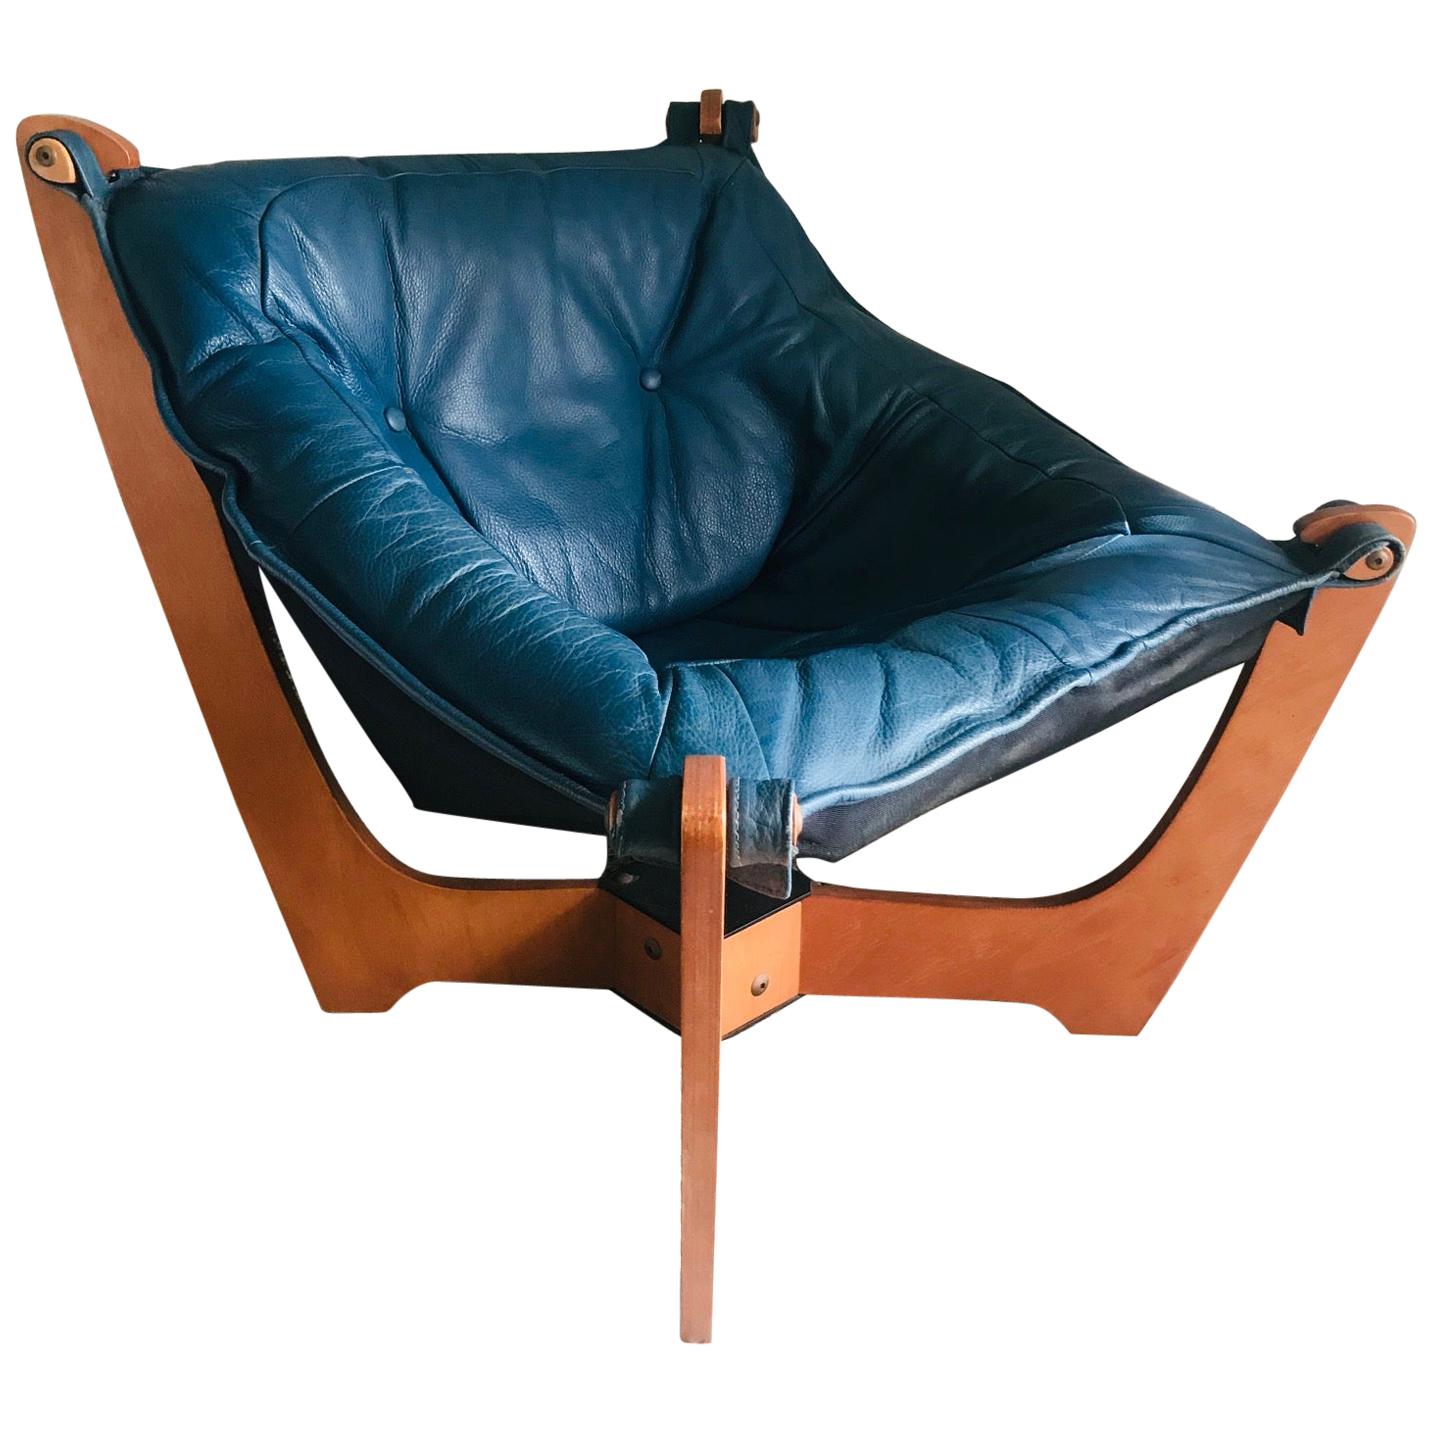 1970s Luna Lounge Chair by Odd Knutsen in Cadet Blue Leather, Norway